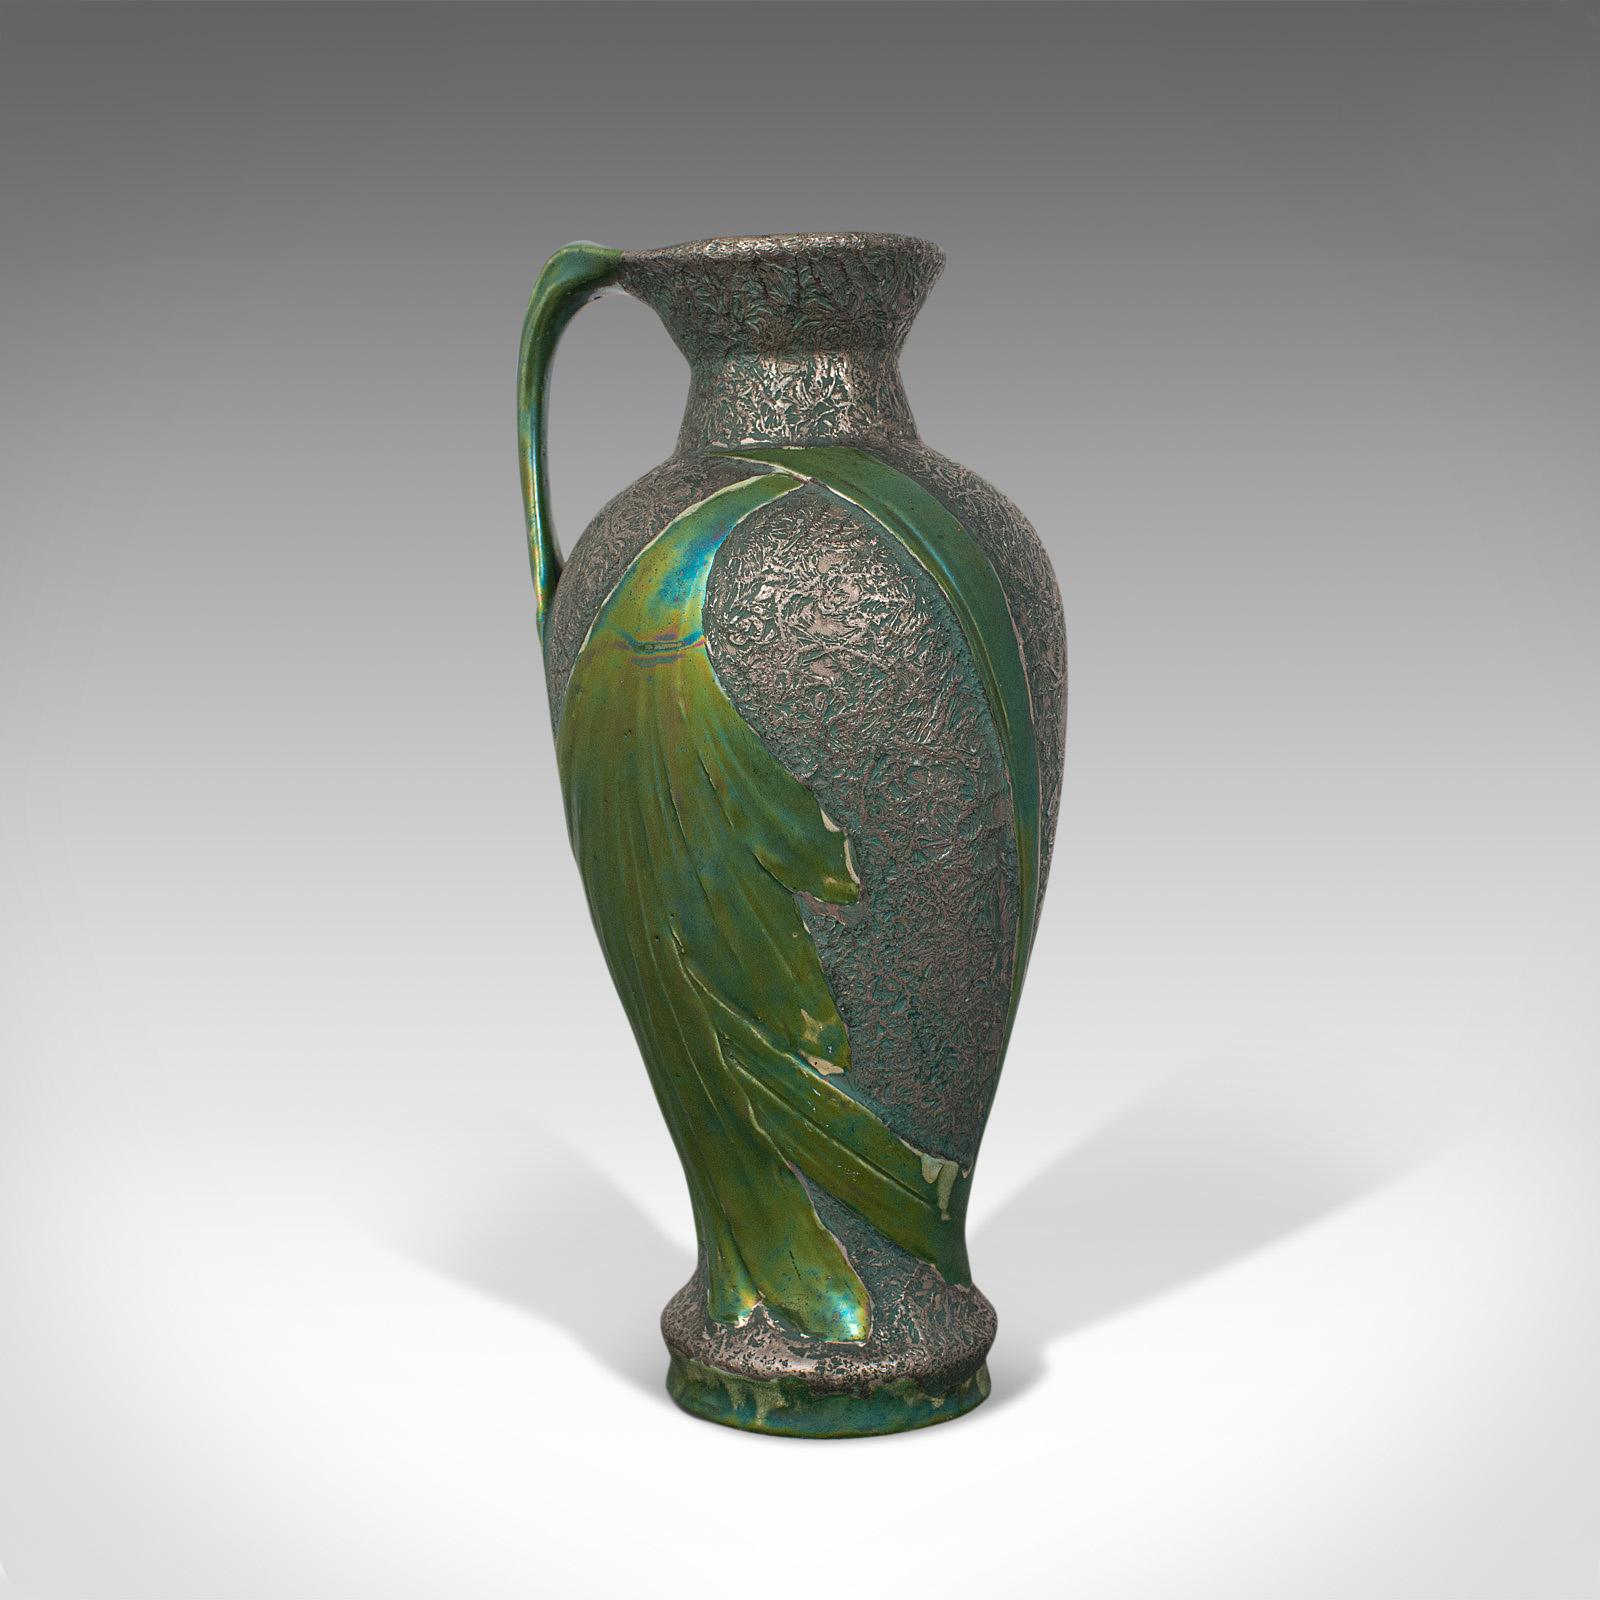 This is an antique serving ewer. An Austrian, ceramic amphora or jug, dating to the Art Nouveau period, circa 1900.

Alluring verdant hues and organic form
Displaying a desirable aged patina - free of marks and losses
Ceramic presented in ornate